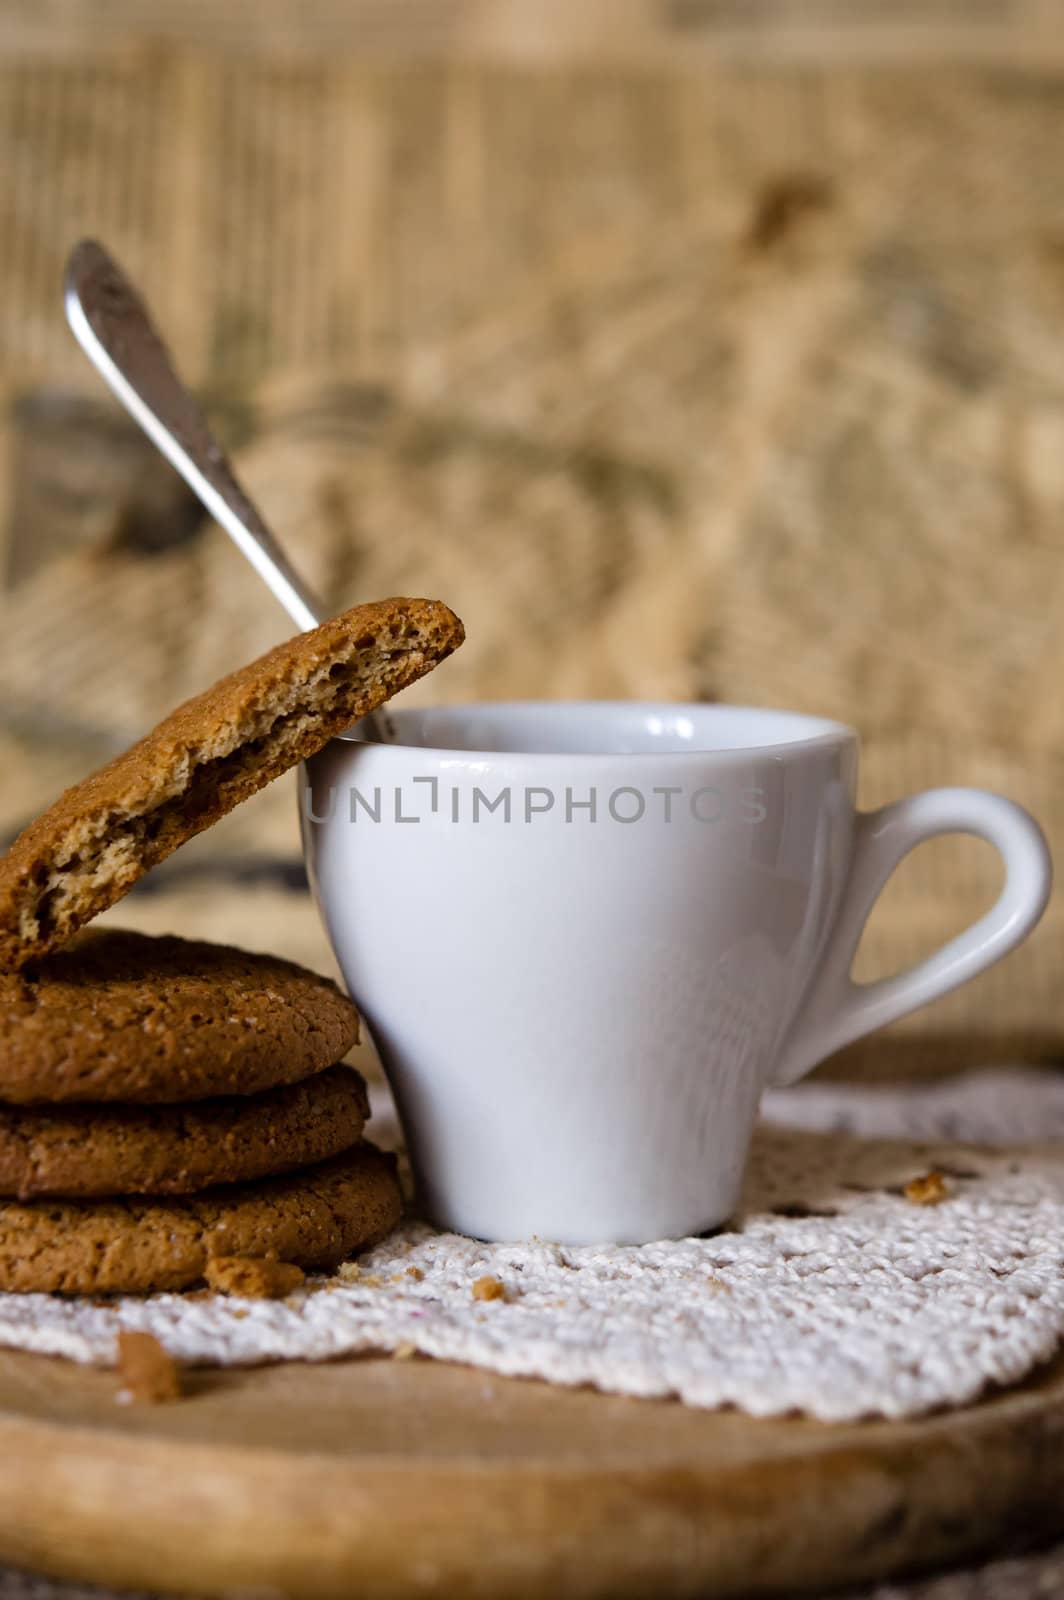 Oat cookies biscuits with cup of coffee by kirs-ua